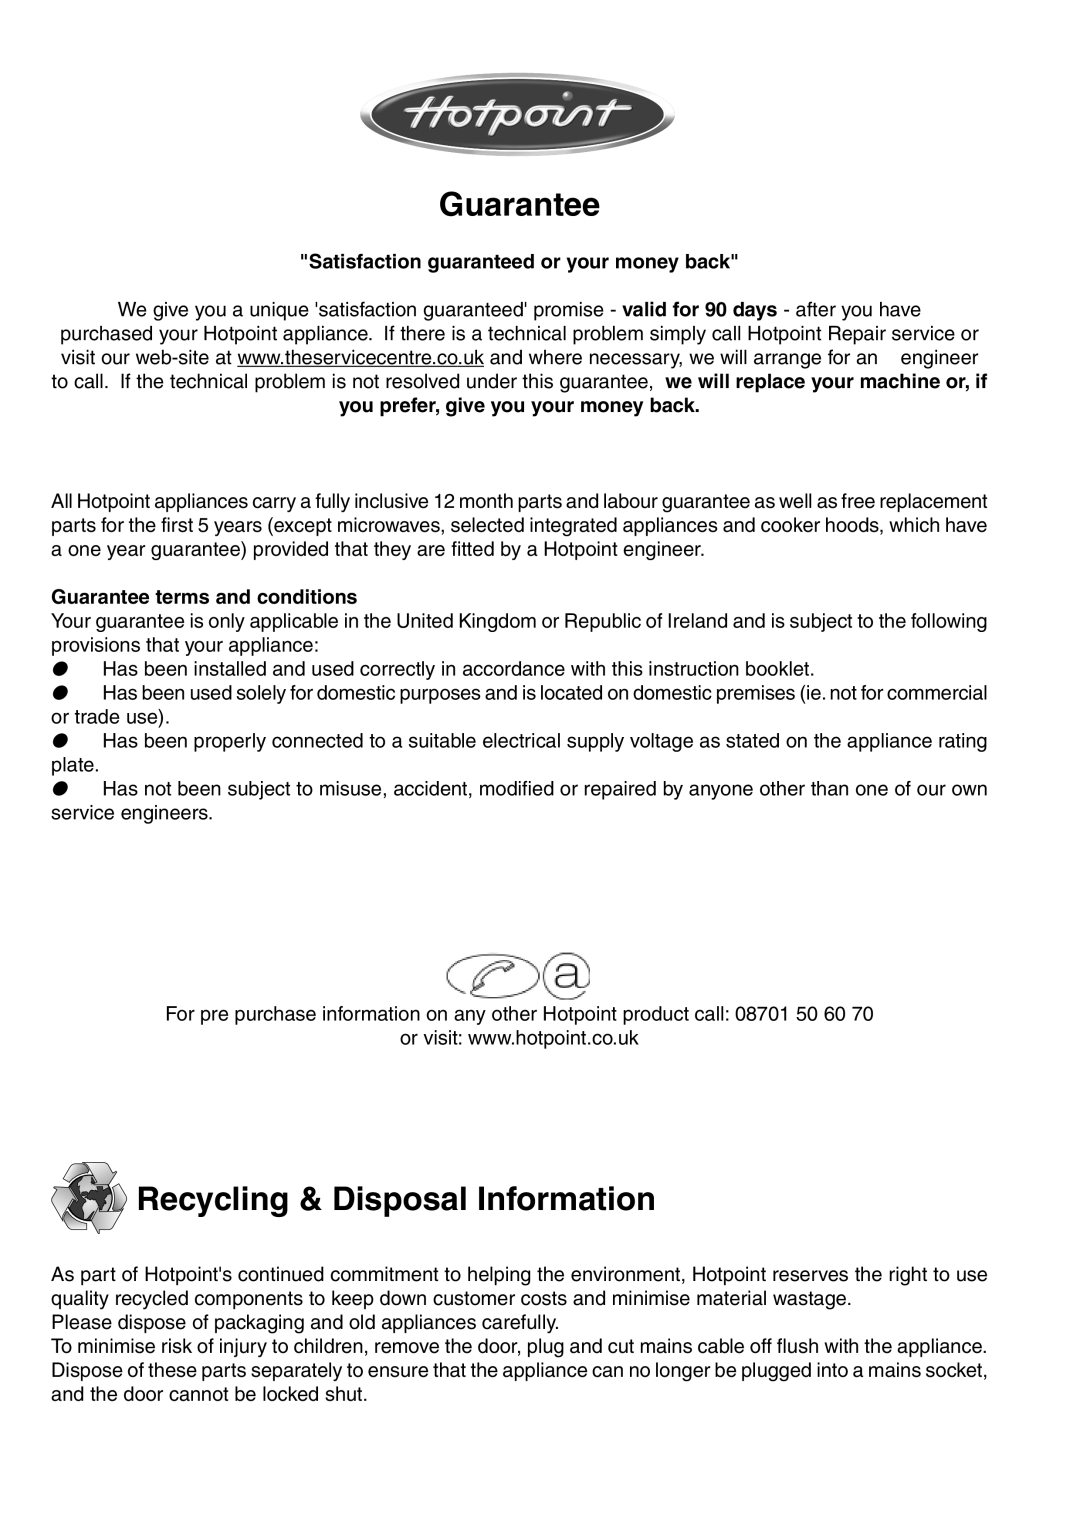 Hotpoint SD97PI, SD97PC manual Guarantee, Recycling & Disposal Information, Satisfaction guaranteed or your money back 